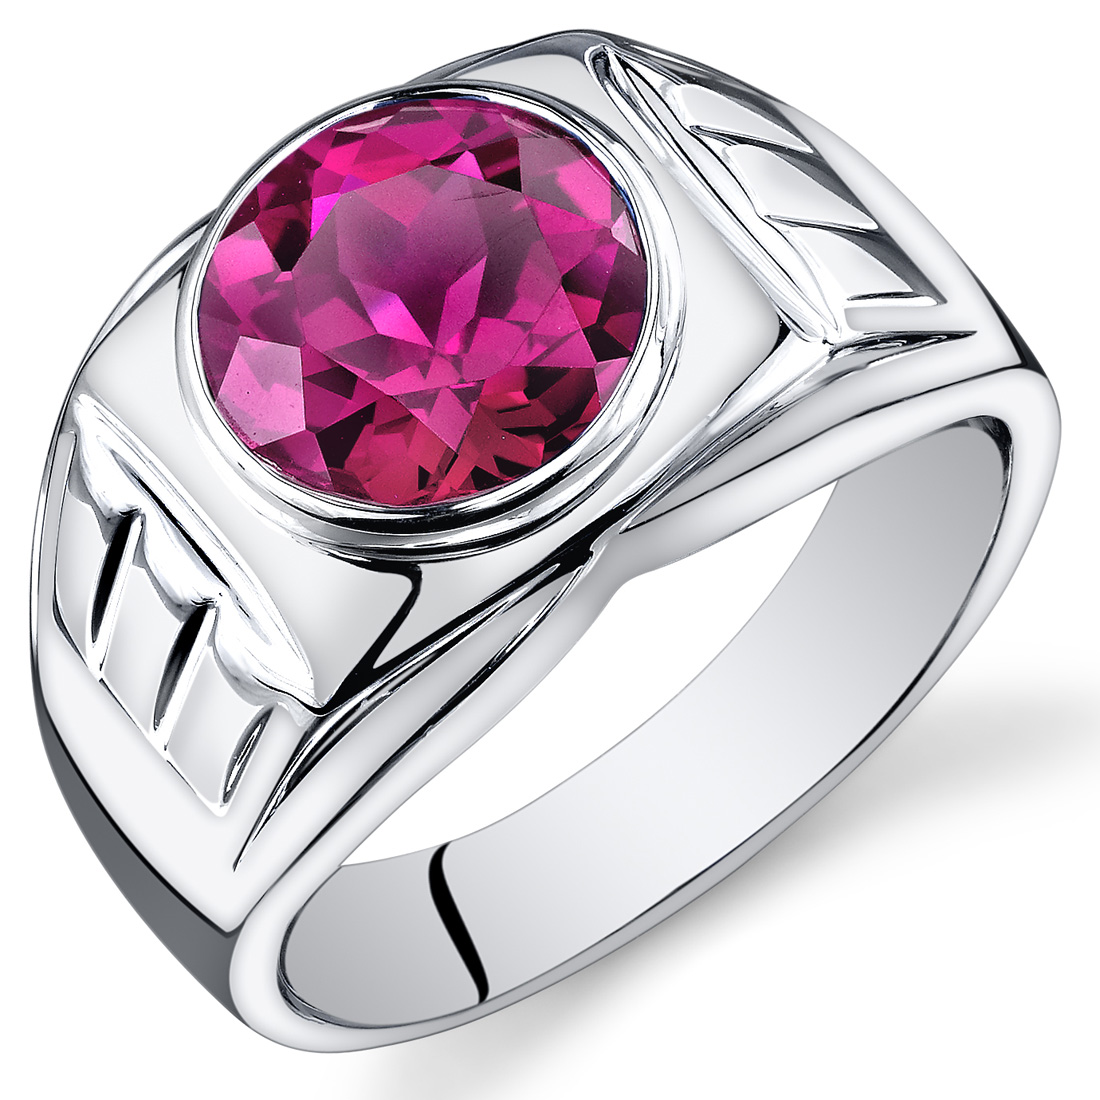 Mens 5.5 cts Round Cut Ruby Sterling Silver Ring Sizes 8 To 13 eBay